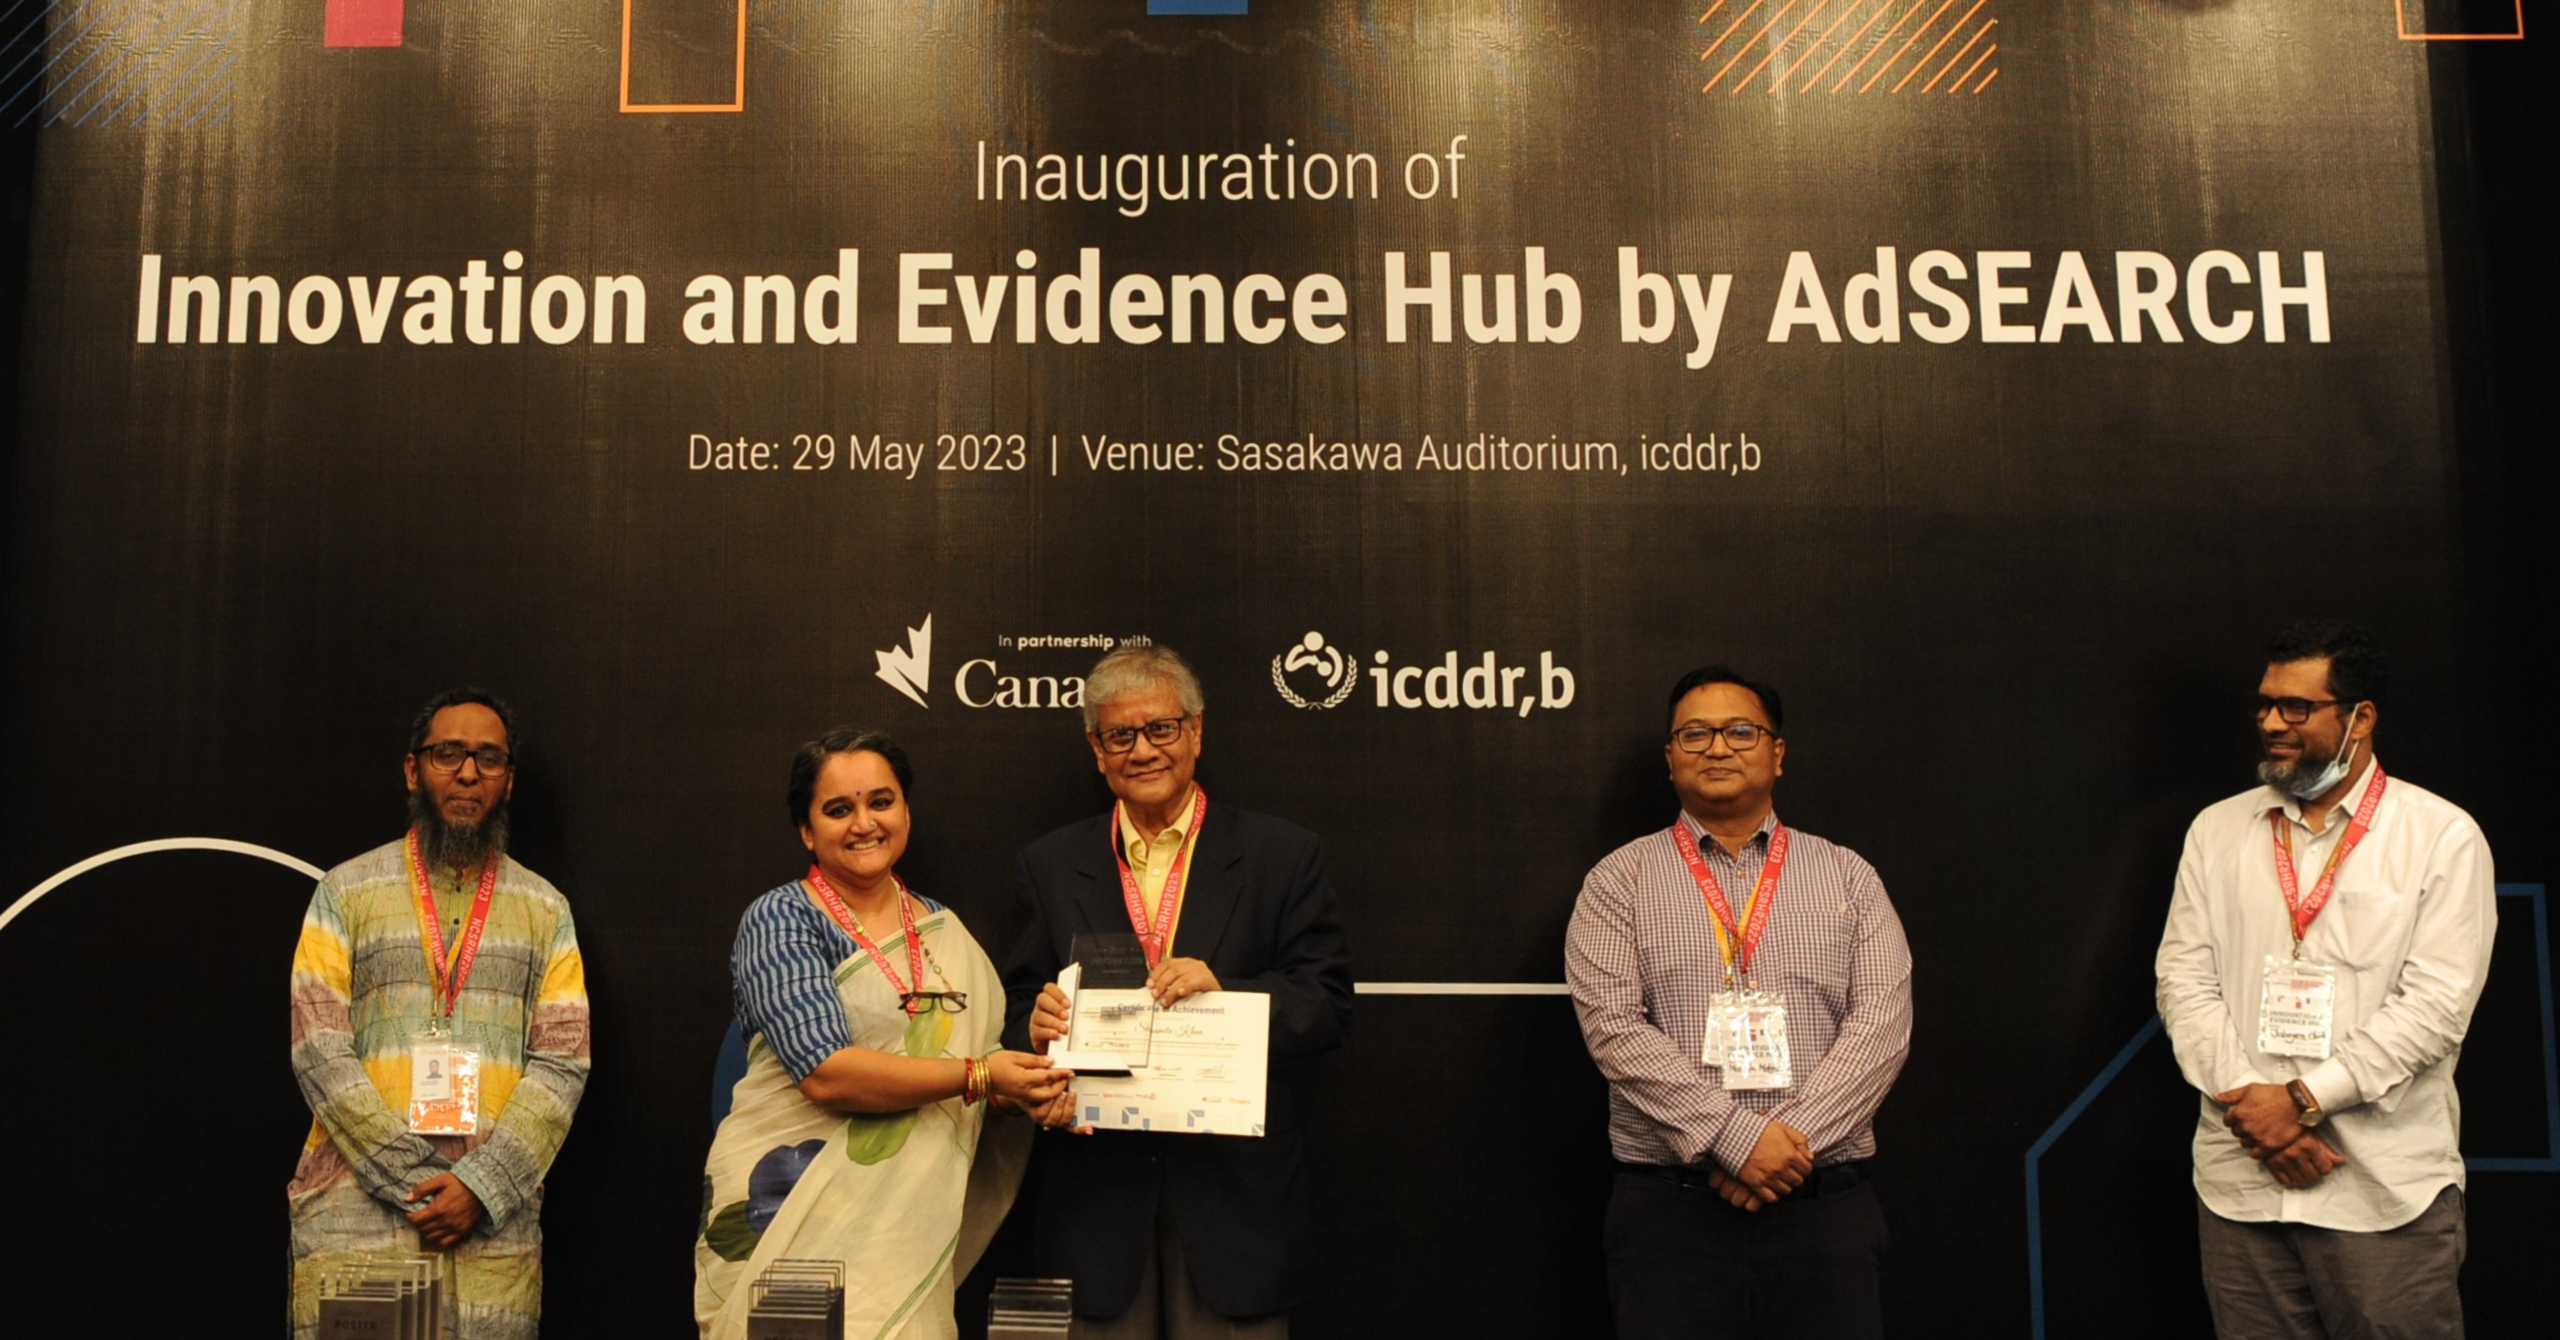 D4I’s Knowledge Management and Communications Specialist accepts the grant from the Global Affairs Canada-funded Advancing Sexual and Reproductive Health and Rights (AdSEARCH) project in Dhaka, Bangladesh